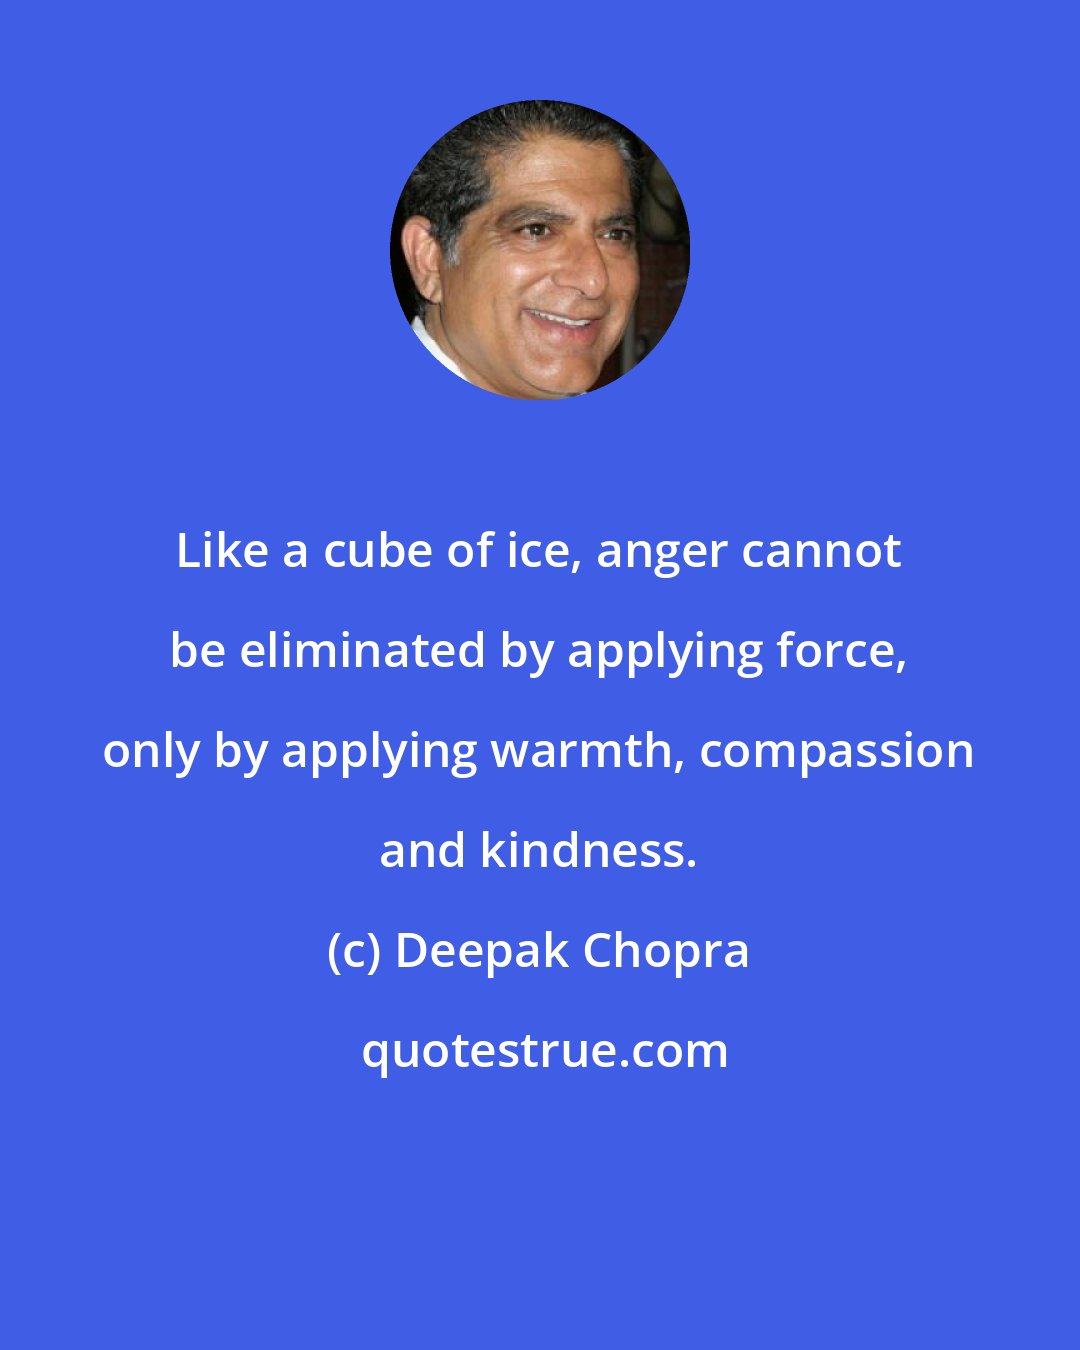 Deepak Chopra: Like a cube of ice, anger cannot be eliminated by applying force, only by applying warmth, compassion and kindness.